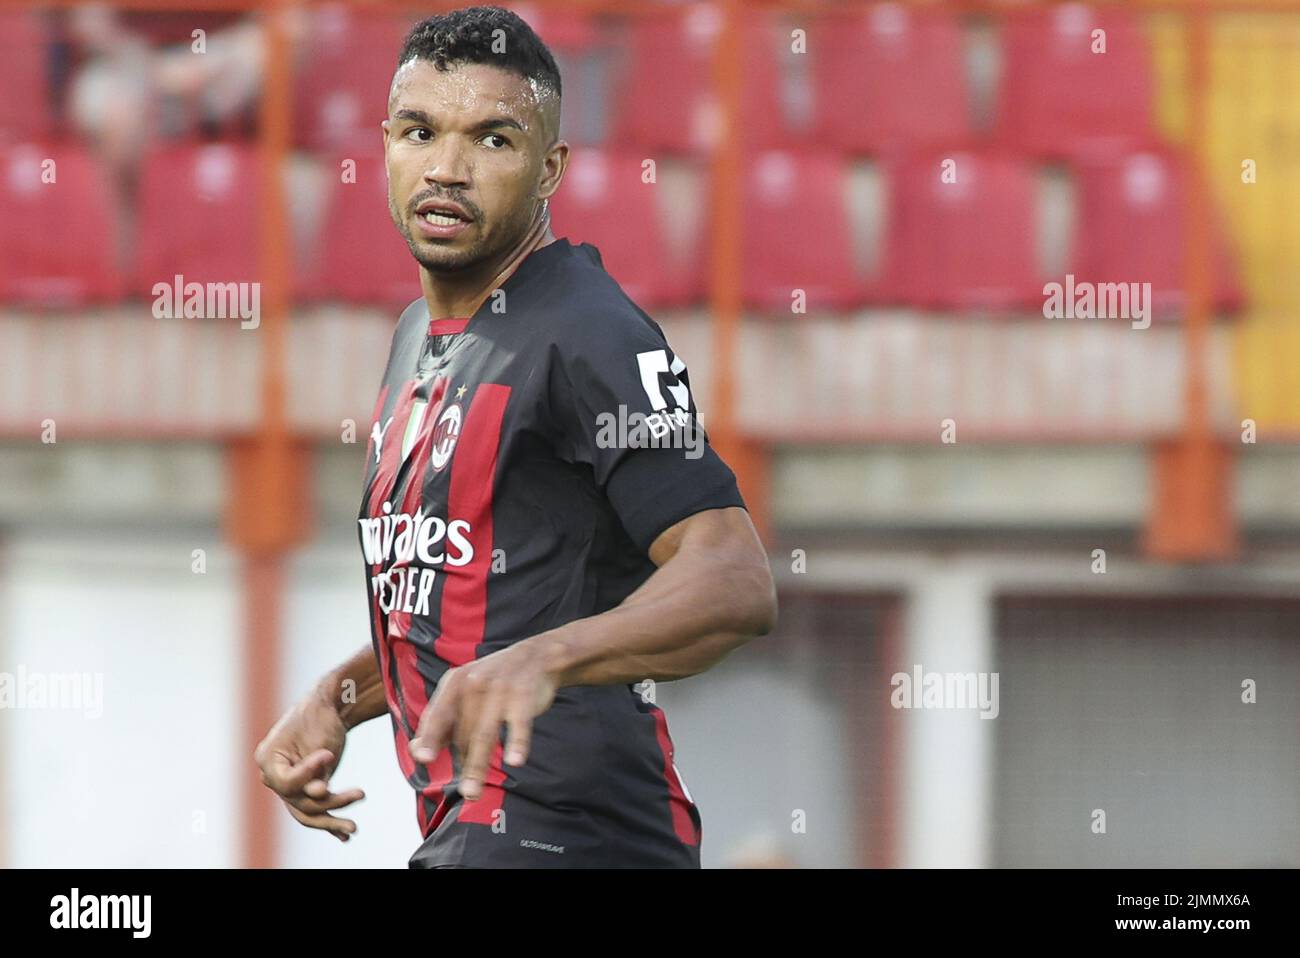 Junior Messias of AC Milan during LR Vicenza vs AC Milan, frendly match pre-season Serie A Tim 2022-23, at Romeo Menti stadium of Vicenza (VI), Italy, on August 06, 2022. Stock Photo